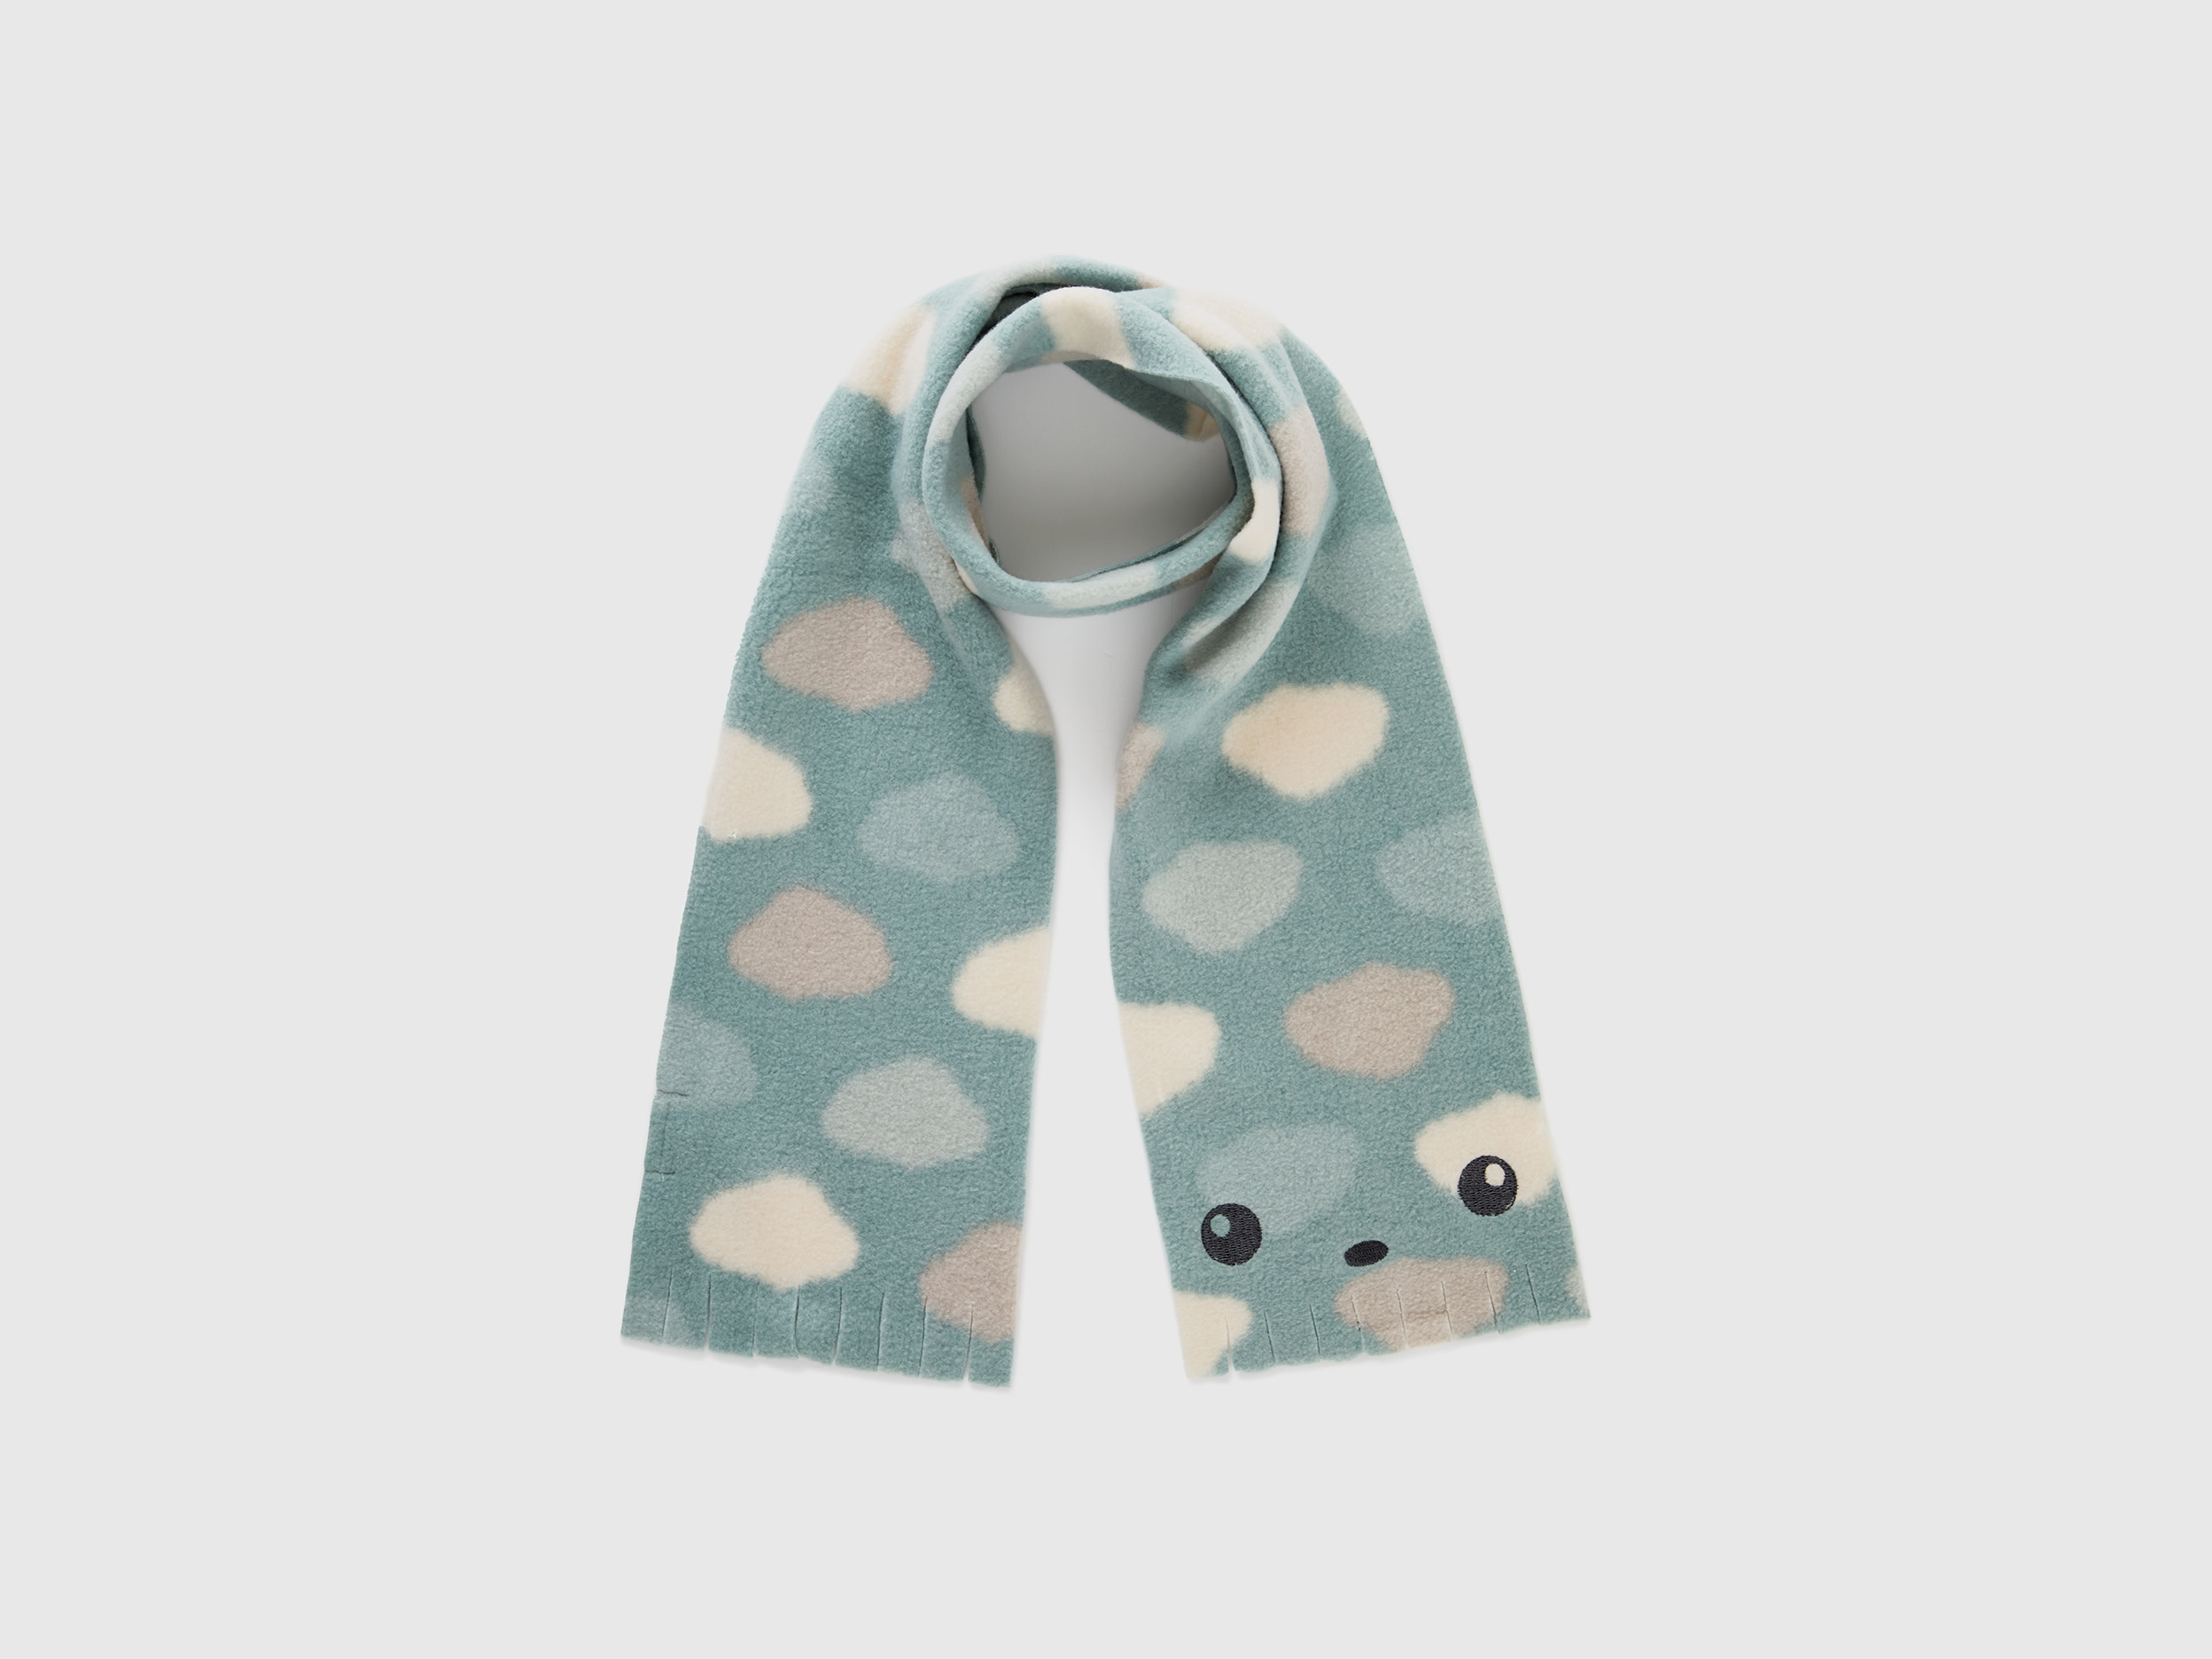 Benetton, Scarf With Cloud Print, size 0-18, Multi-color, Kids